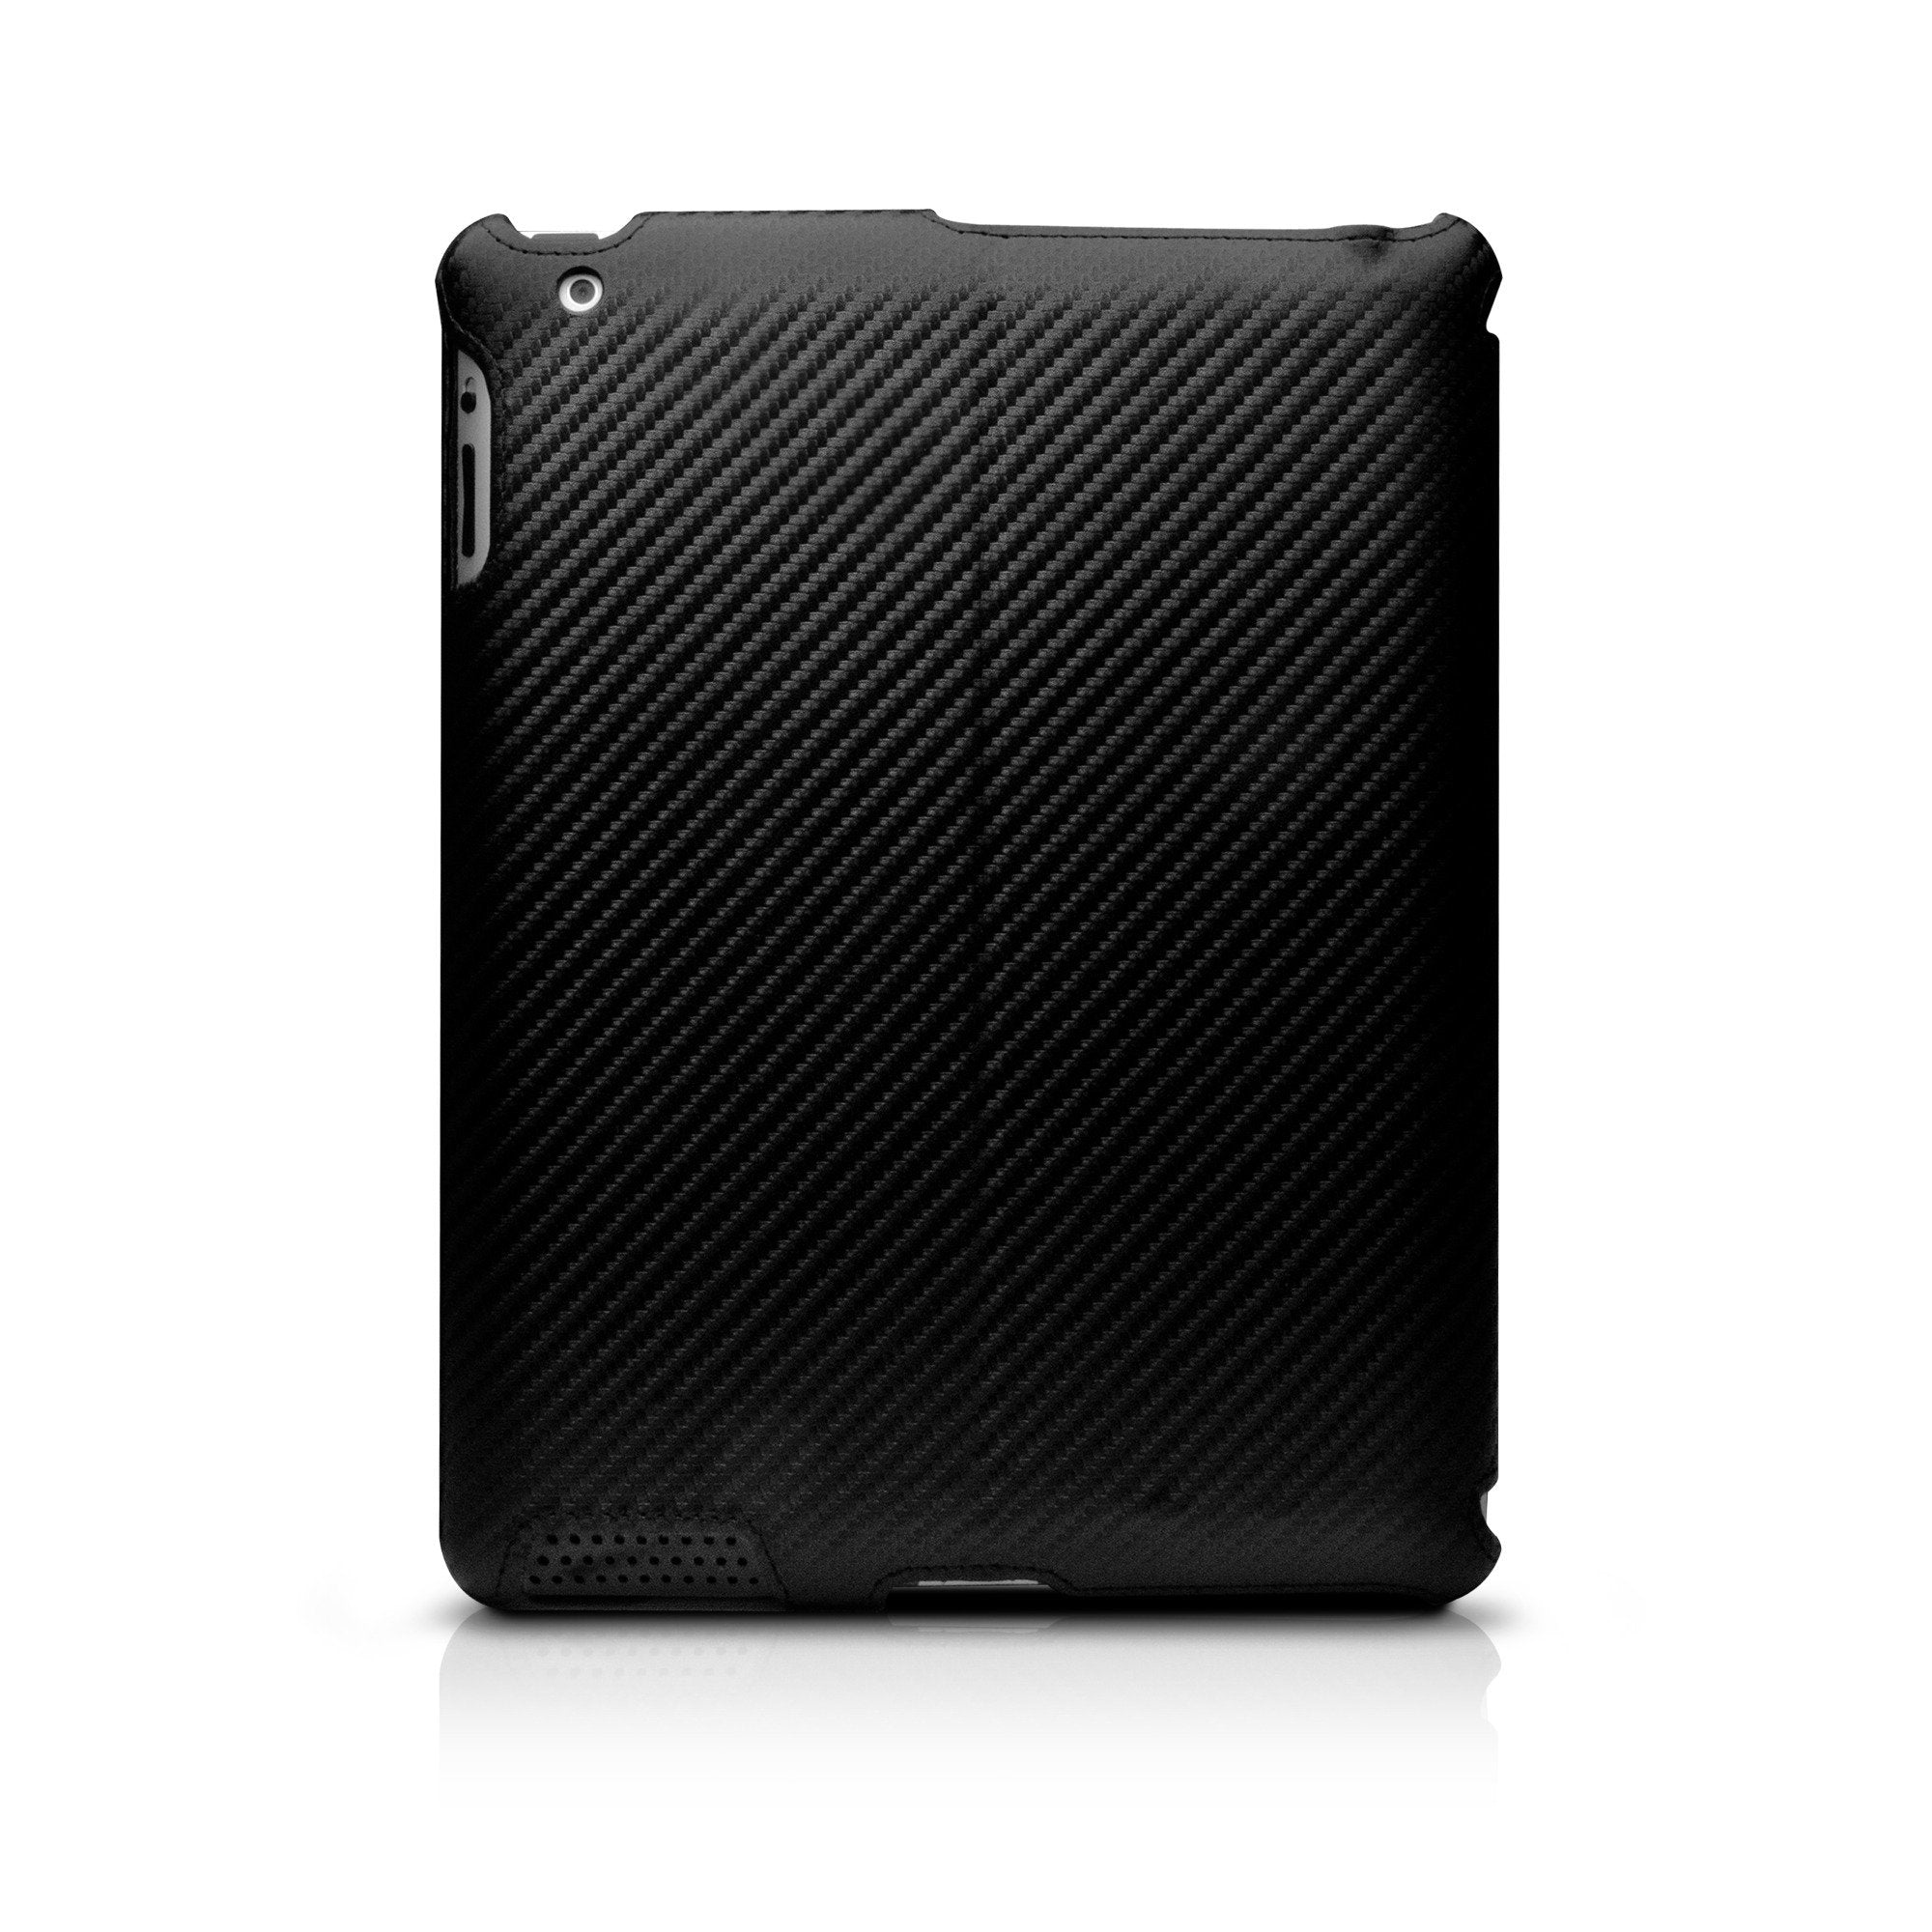 Marware AHHB1P C.E.O. Hybrid for the iPad (3rd and 4th Generation), Carbon Fiber